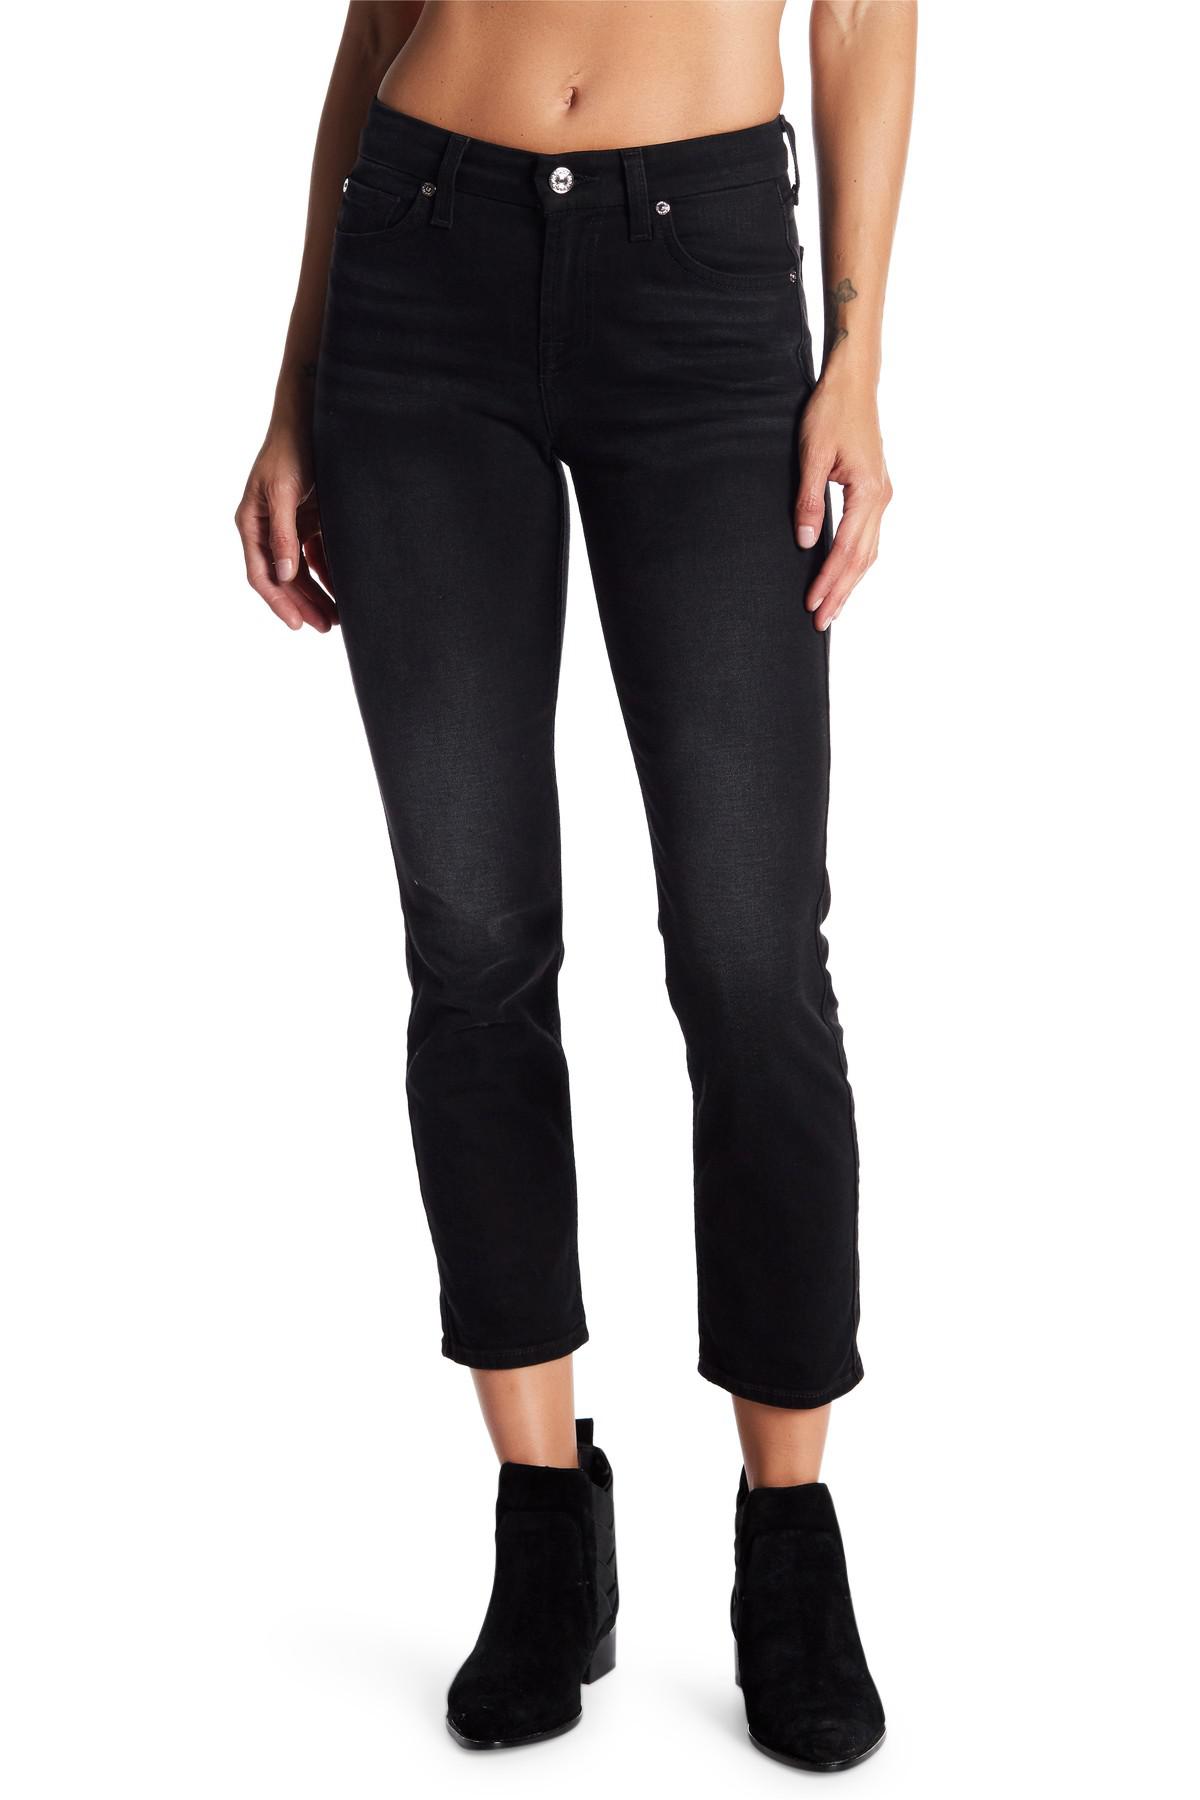 7 For All Mankind Karah Crop Jeans | Lyst